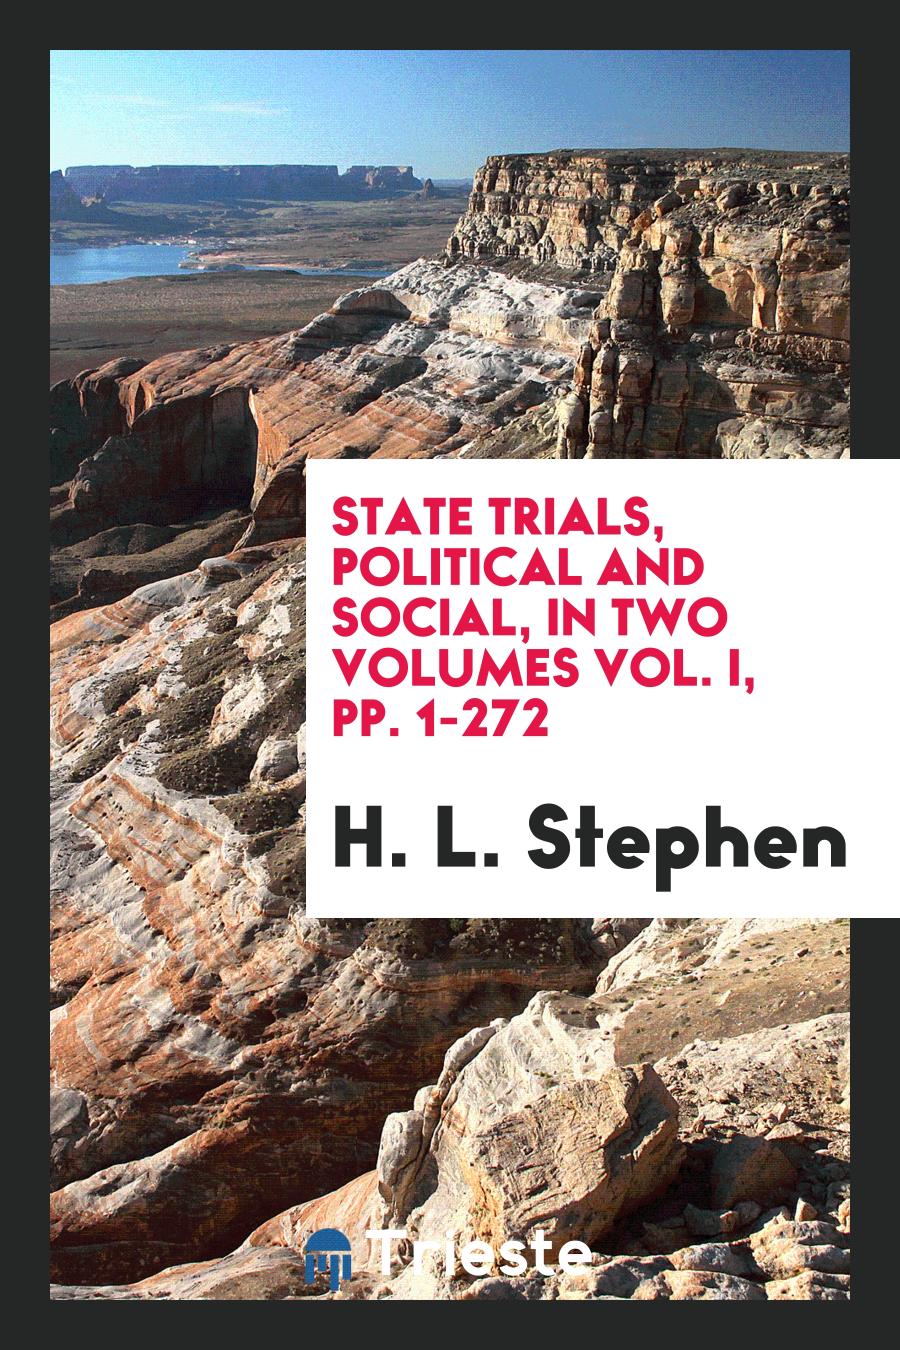 State Trials, Political and Social, in Two Volumes Vol. I, pp. 1-272